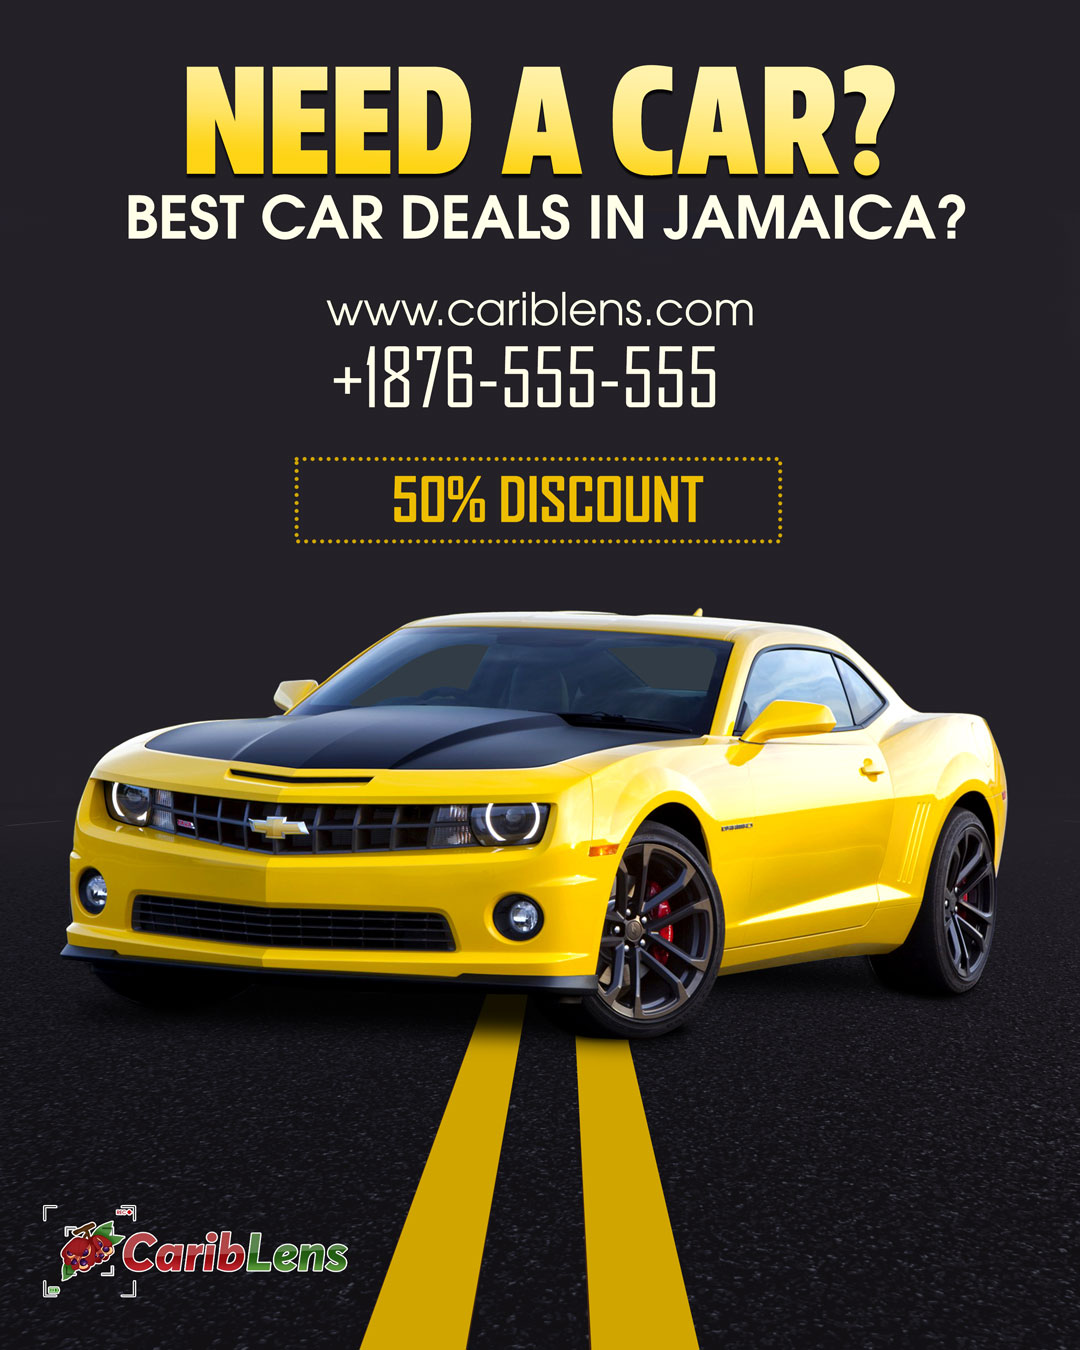 Need Car Car Sale Flyer Psd Template Download